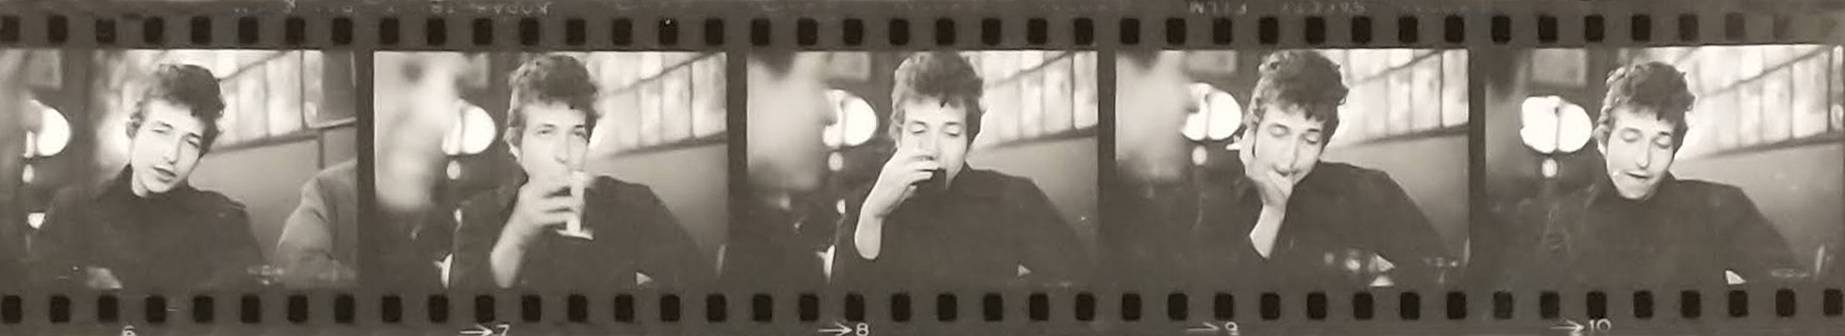 detail of proof sheet of Bob Dylan photographs